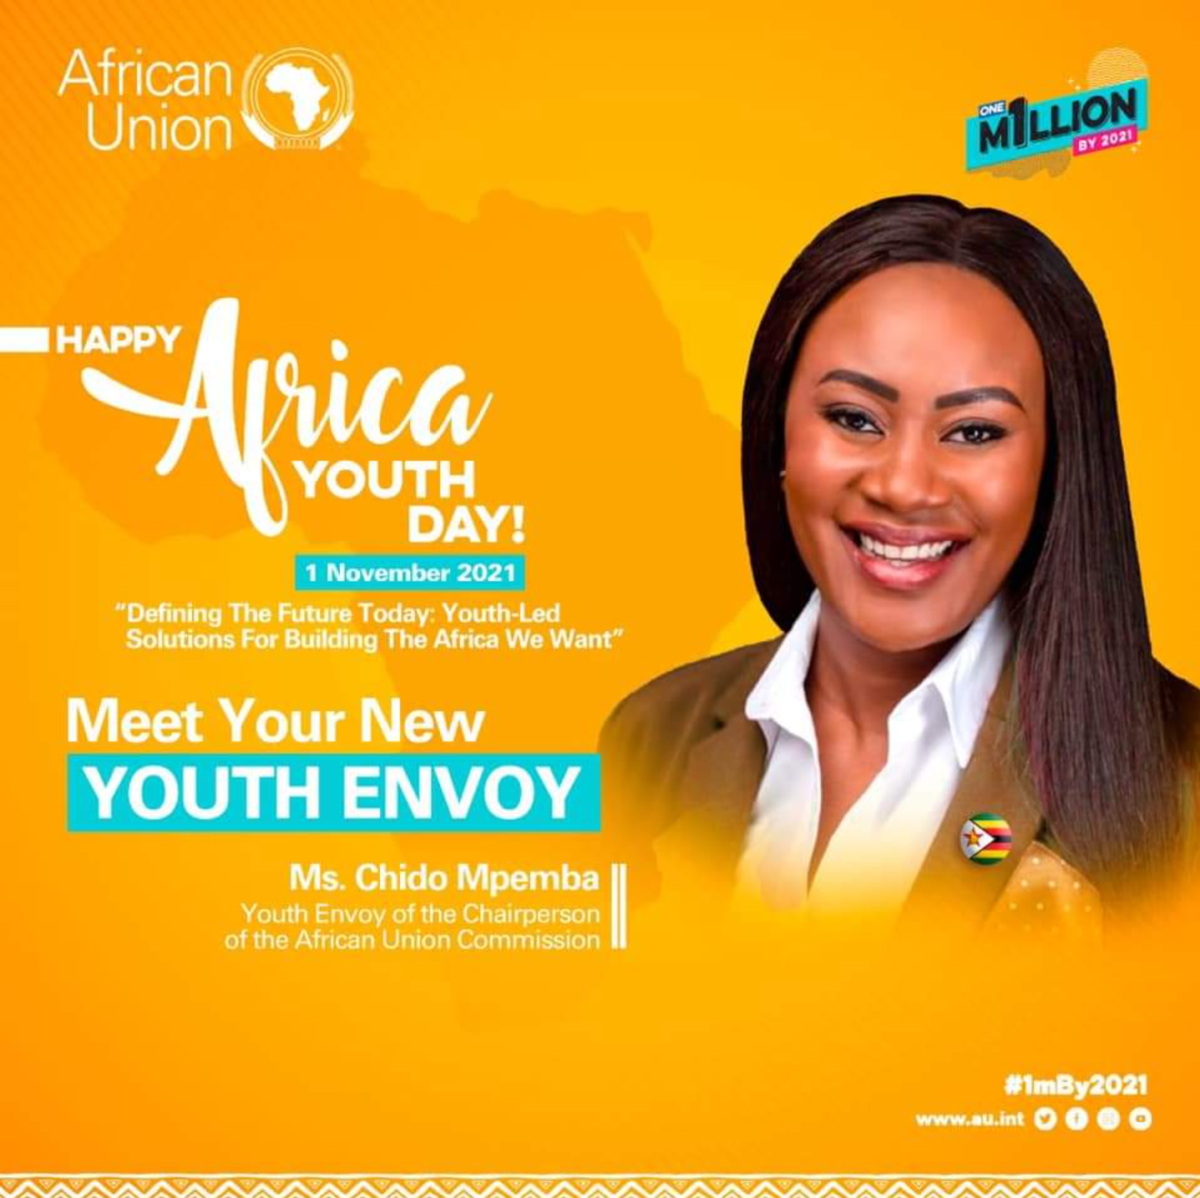 Graphic with a headshot of Chido and text: Happy Africa Youth Day! 1 November 2021 - Defining the Future Today: Youth-Led Solutions for Building the Africa We Want." Meet Your New Youth Envoy, Ms. Chido Mpemba